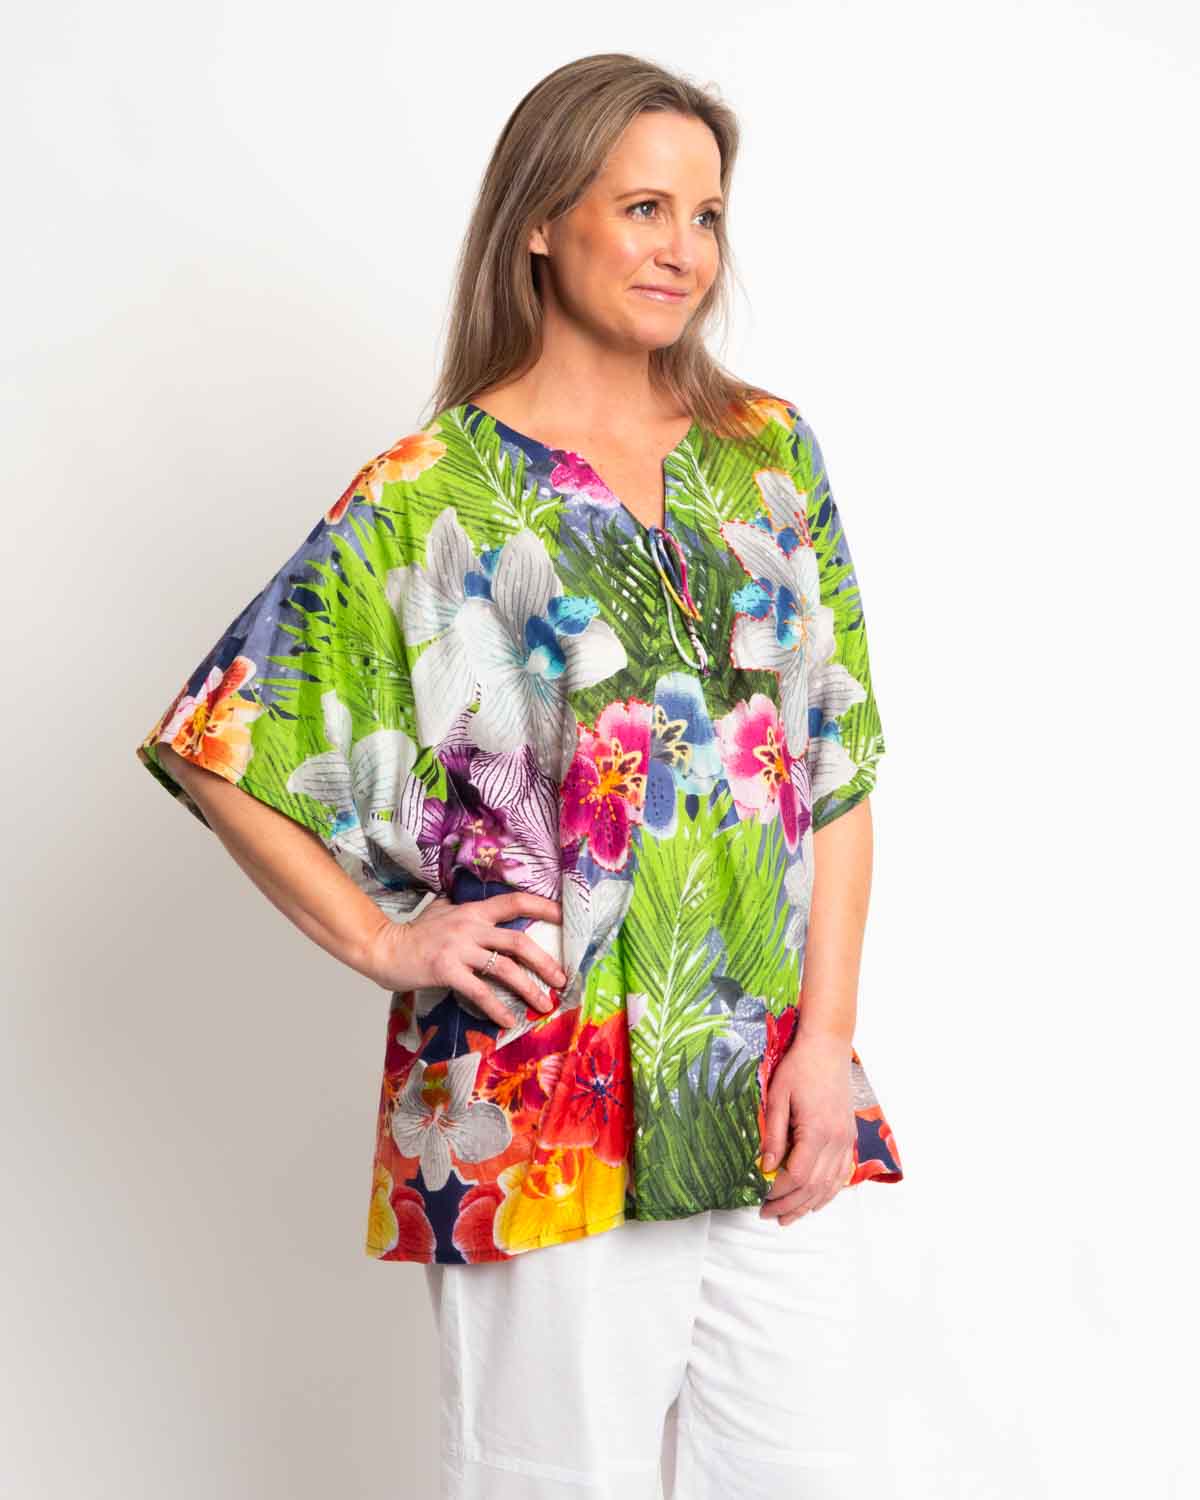 Too Easy Poncho Style V-neck Top in Multi Colour Floral on Blue